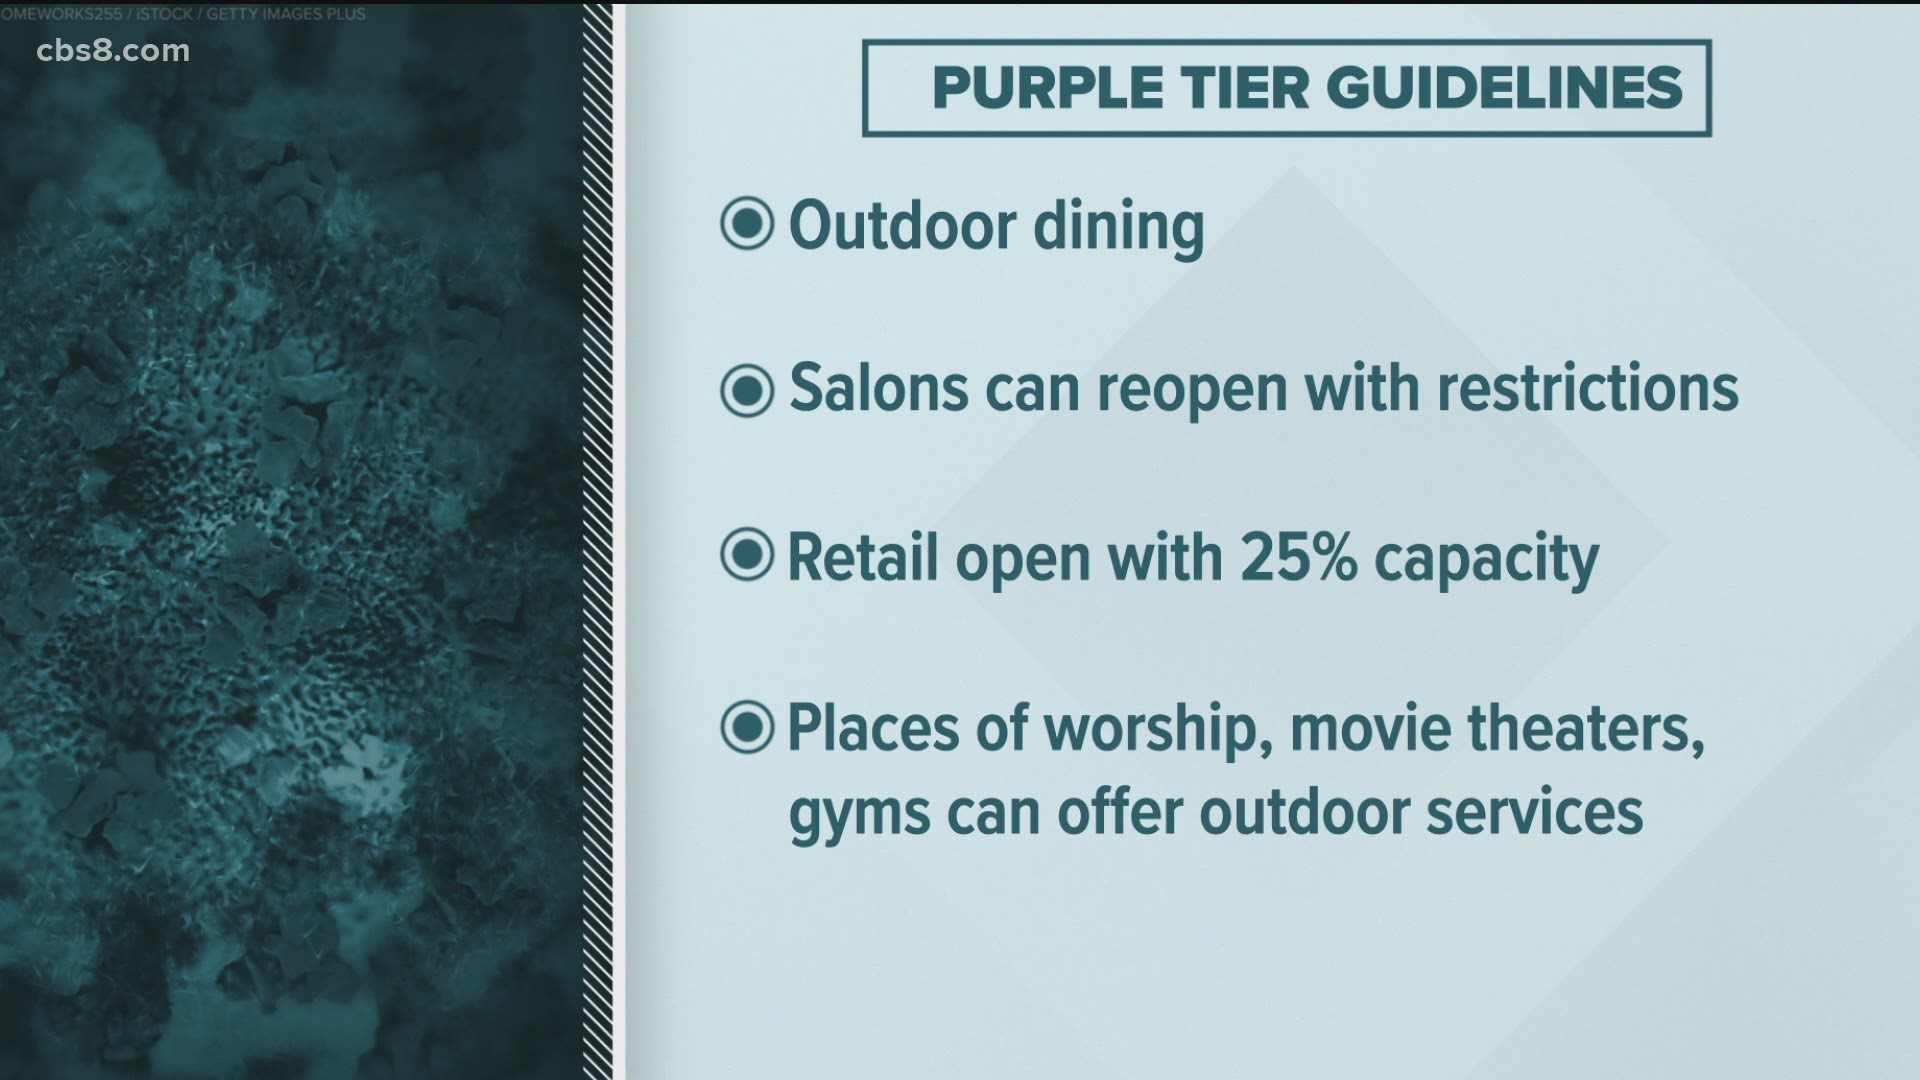 San Diego is now back in the purple tier, which means restaurants can resume outdoor dining while salons can reopen with restrictions.